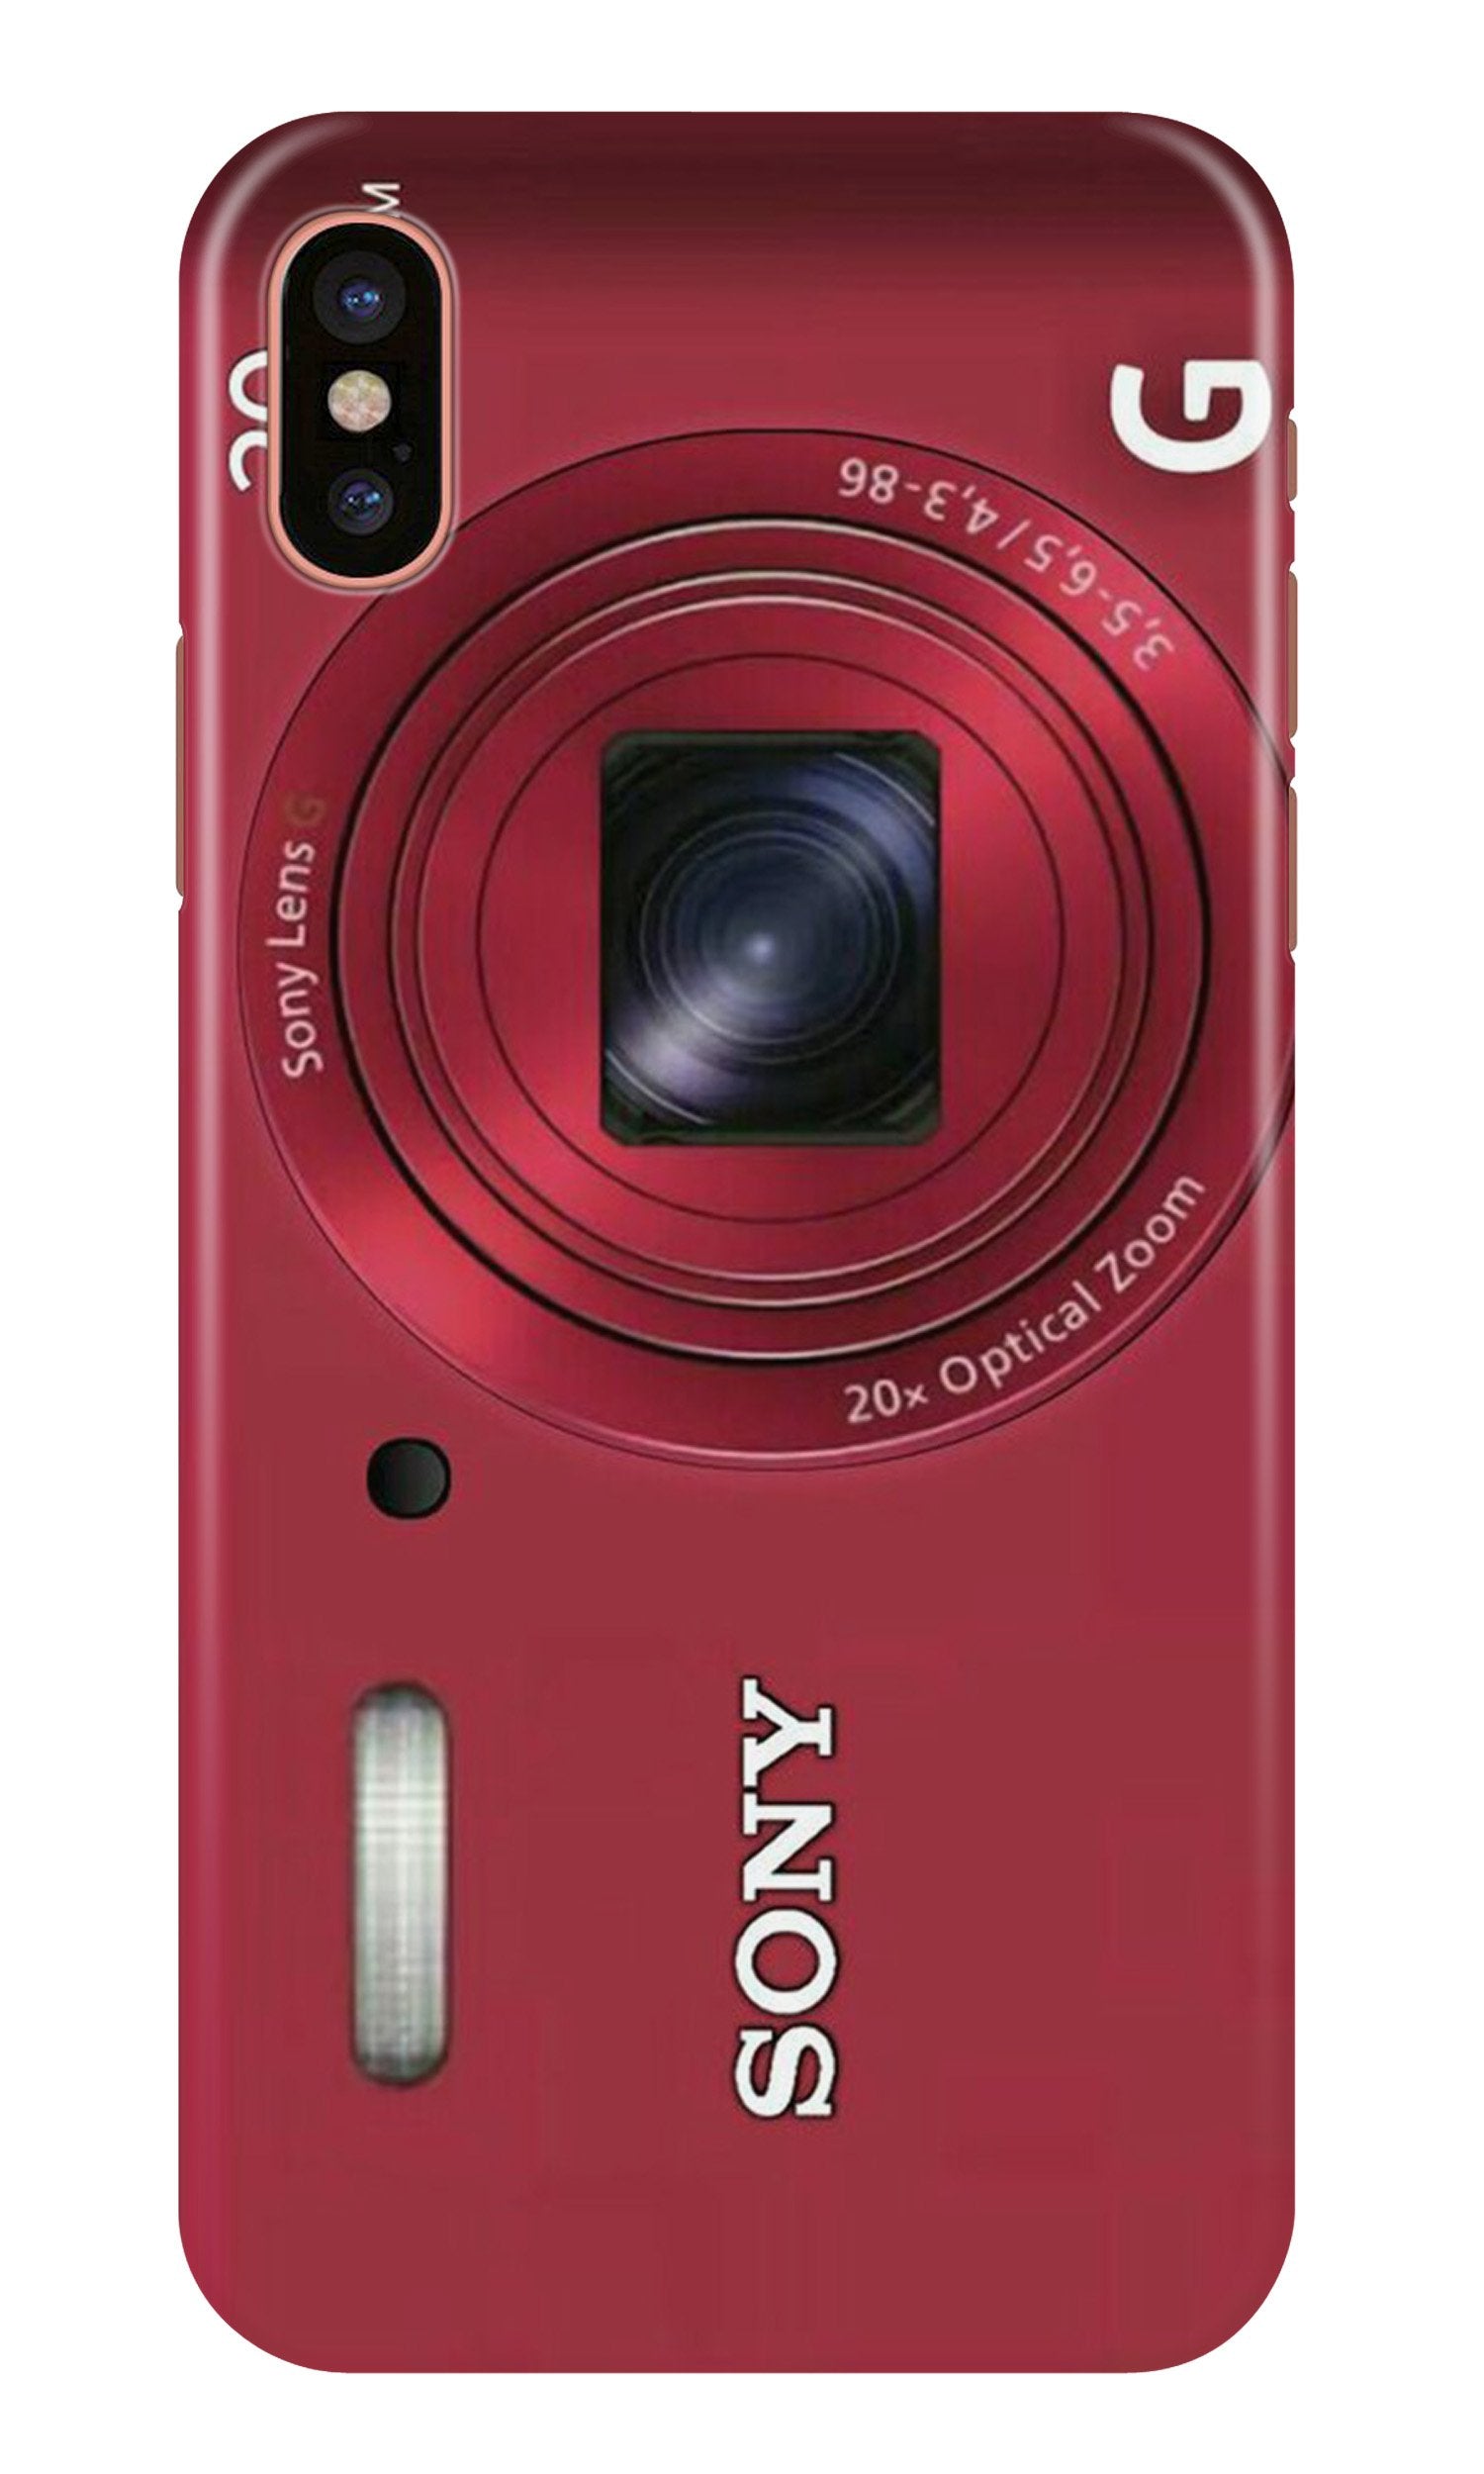 Sony Case for iPhone X (Design No. 274)